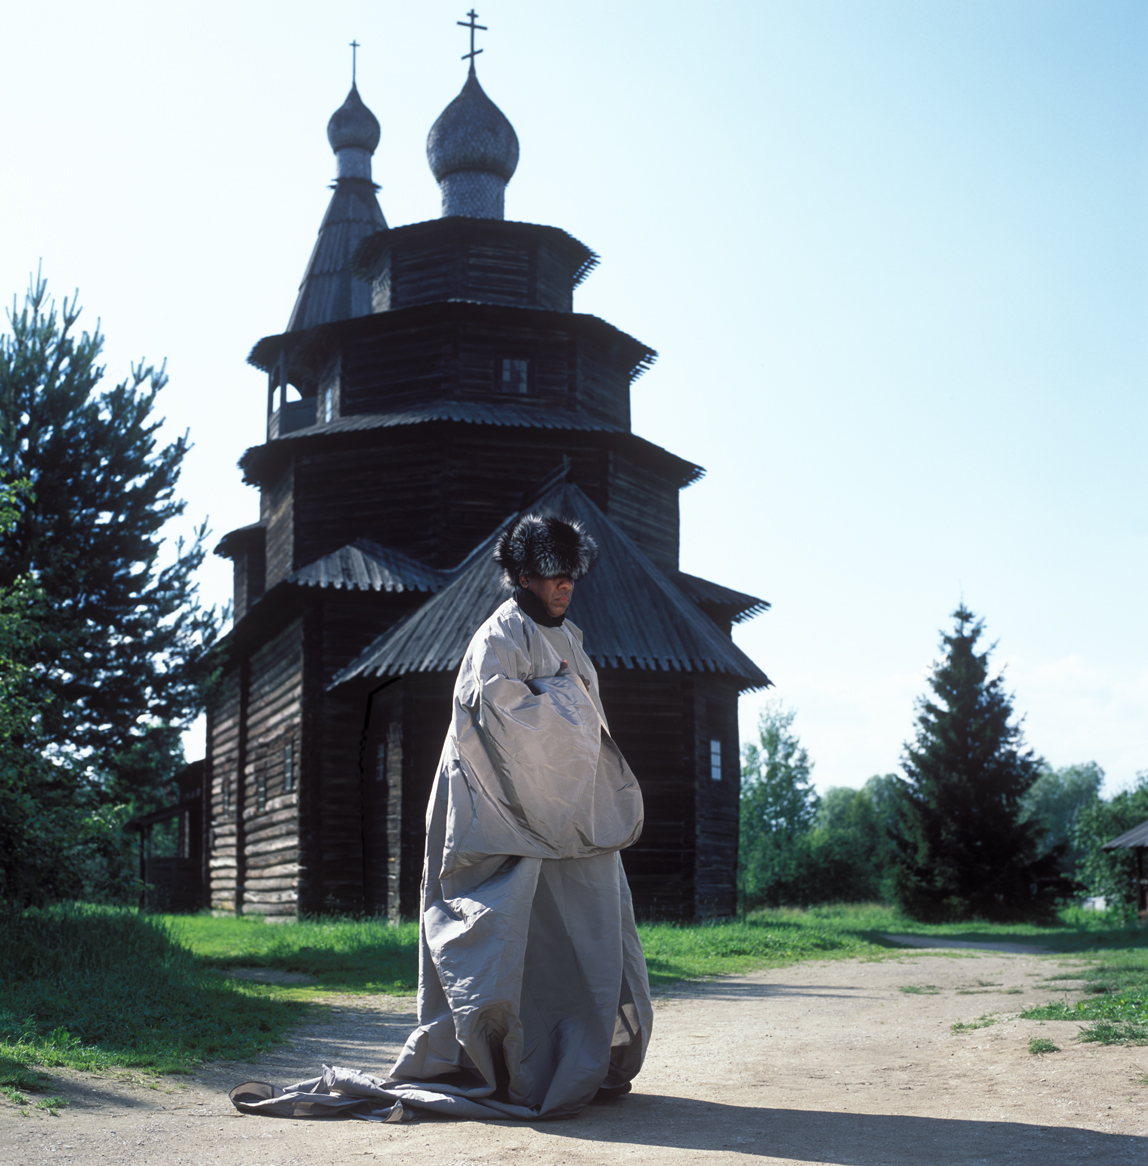 Andre Leon Talley, Vogue magazine's editor at large on his visit to Russia. This picture was taken in Vitoslavitsa Open-Air Museum near Novgorod the Great. Andre Leon Talley's outfit consists of a gown by Oscar de la Renta and silver fox fur hat by Prada.